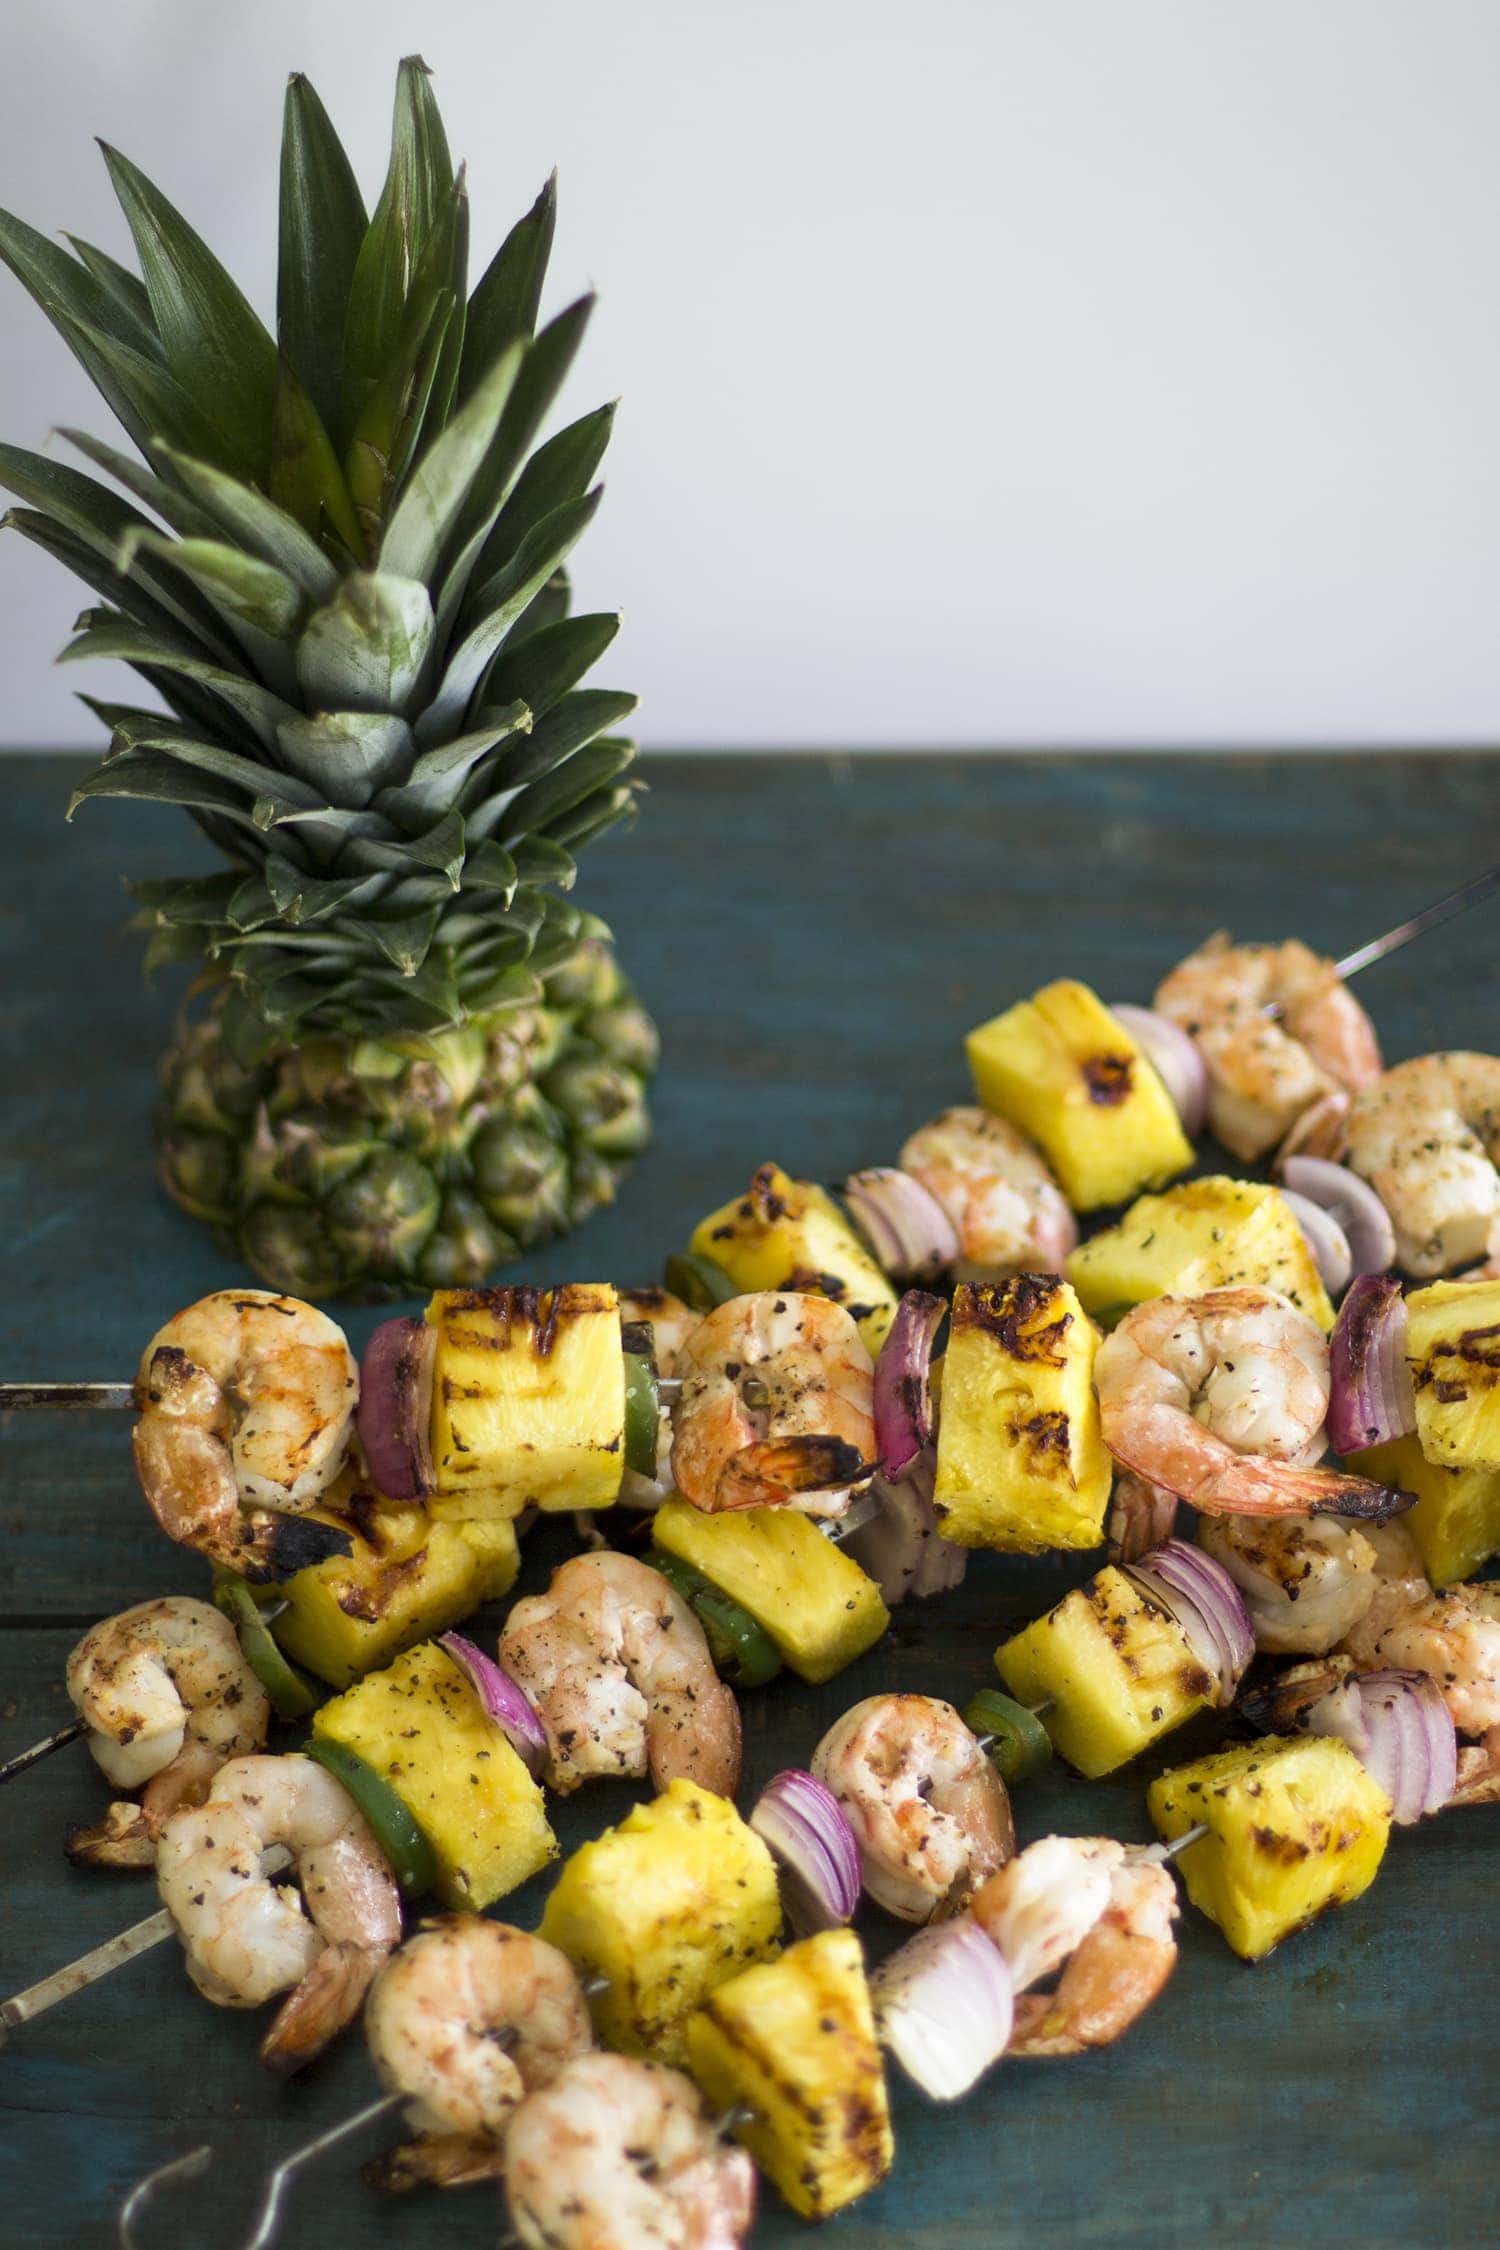 Grilled+Pineapple+and+Shrimp+Skewers-+My+Diary+of+Us